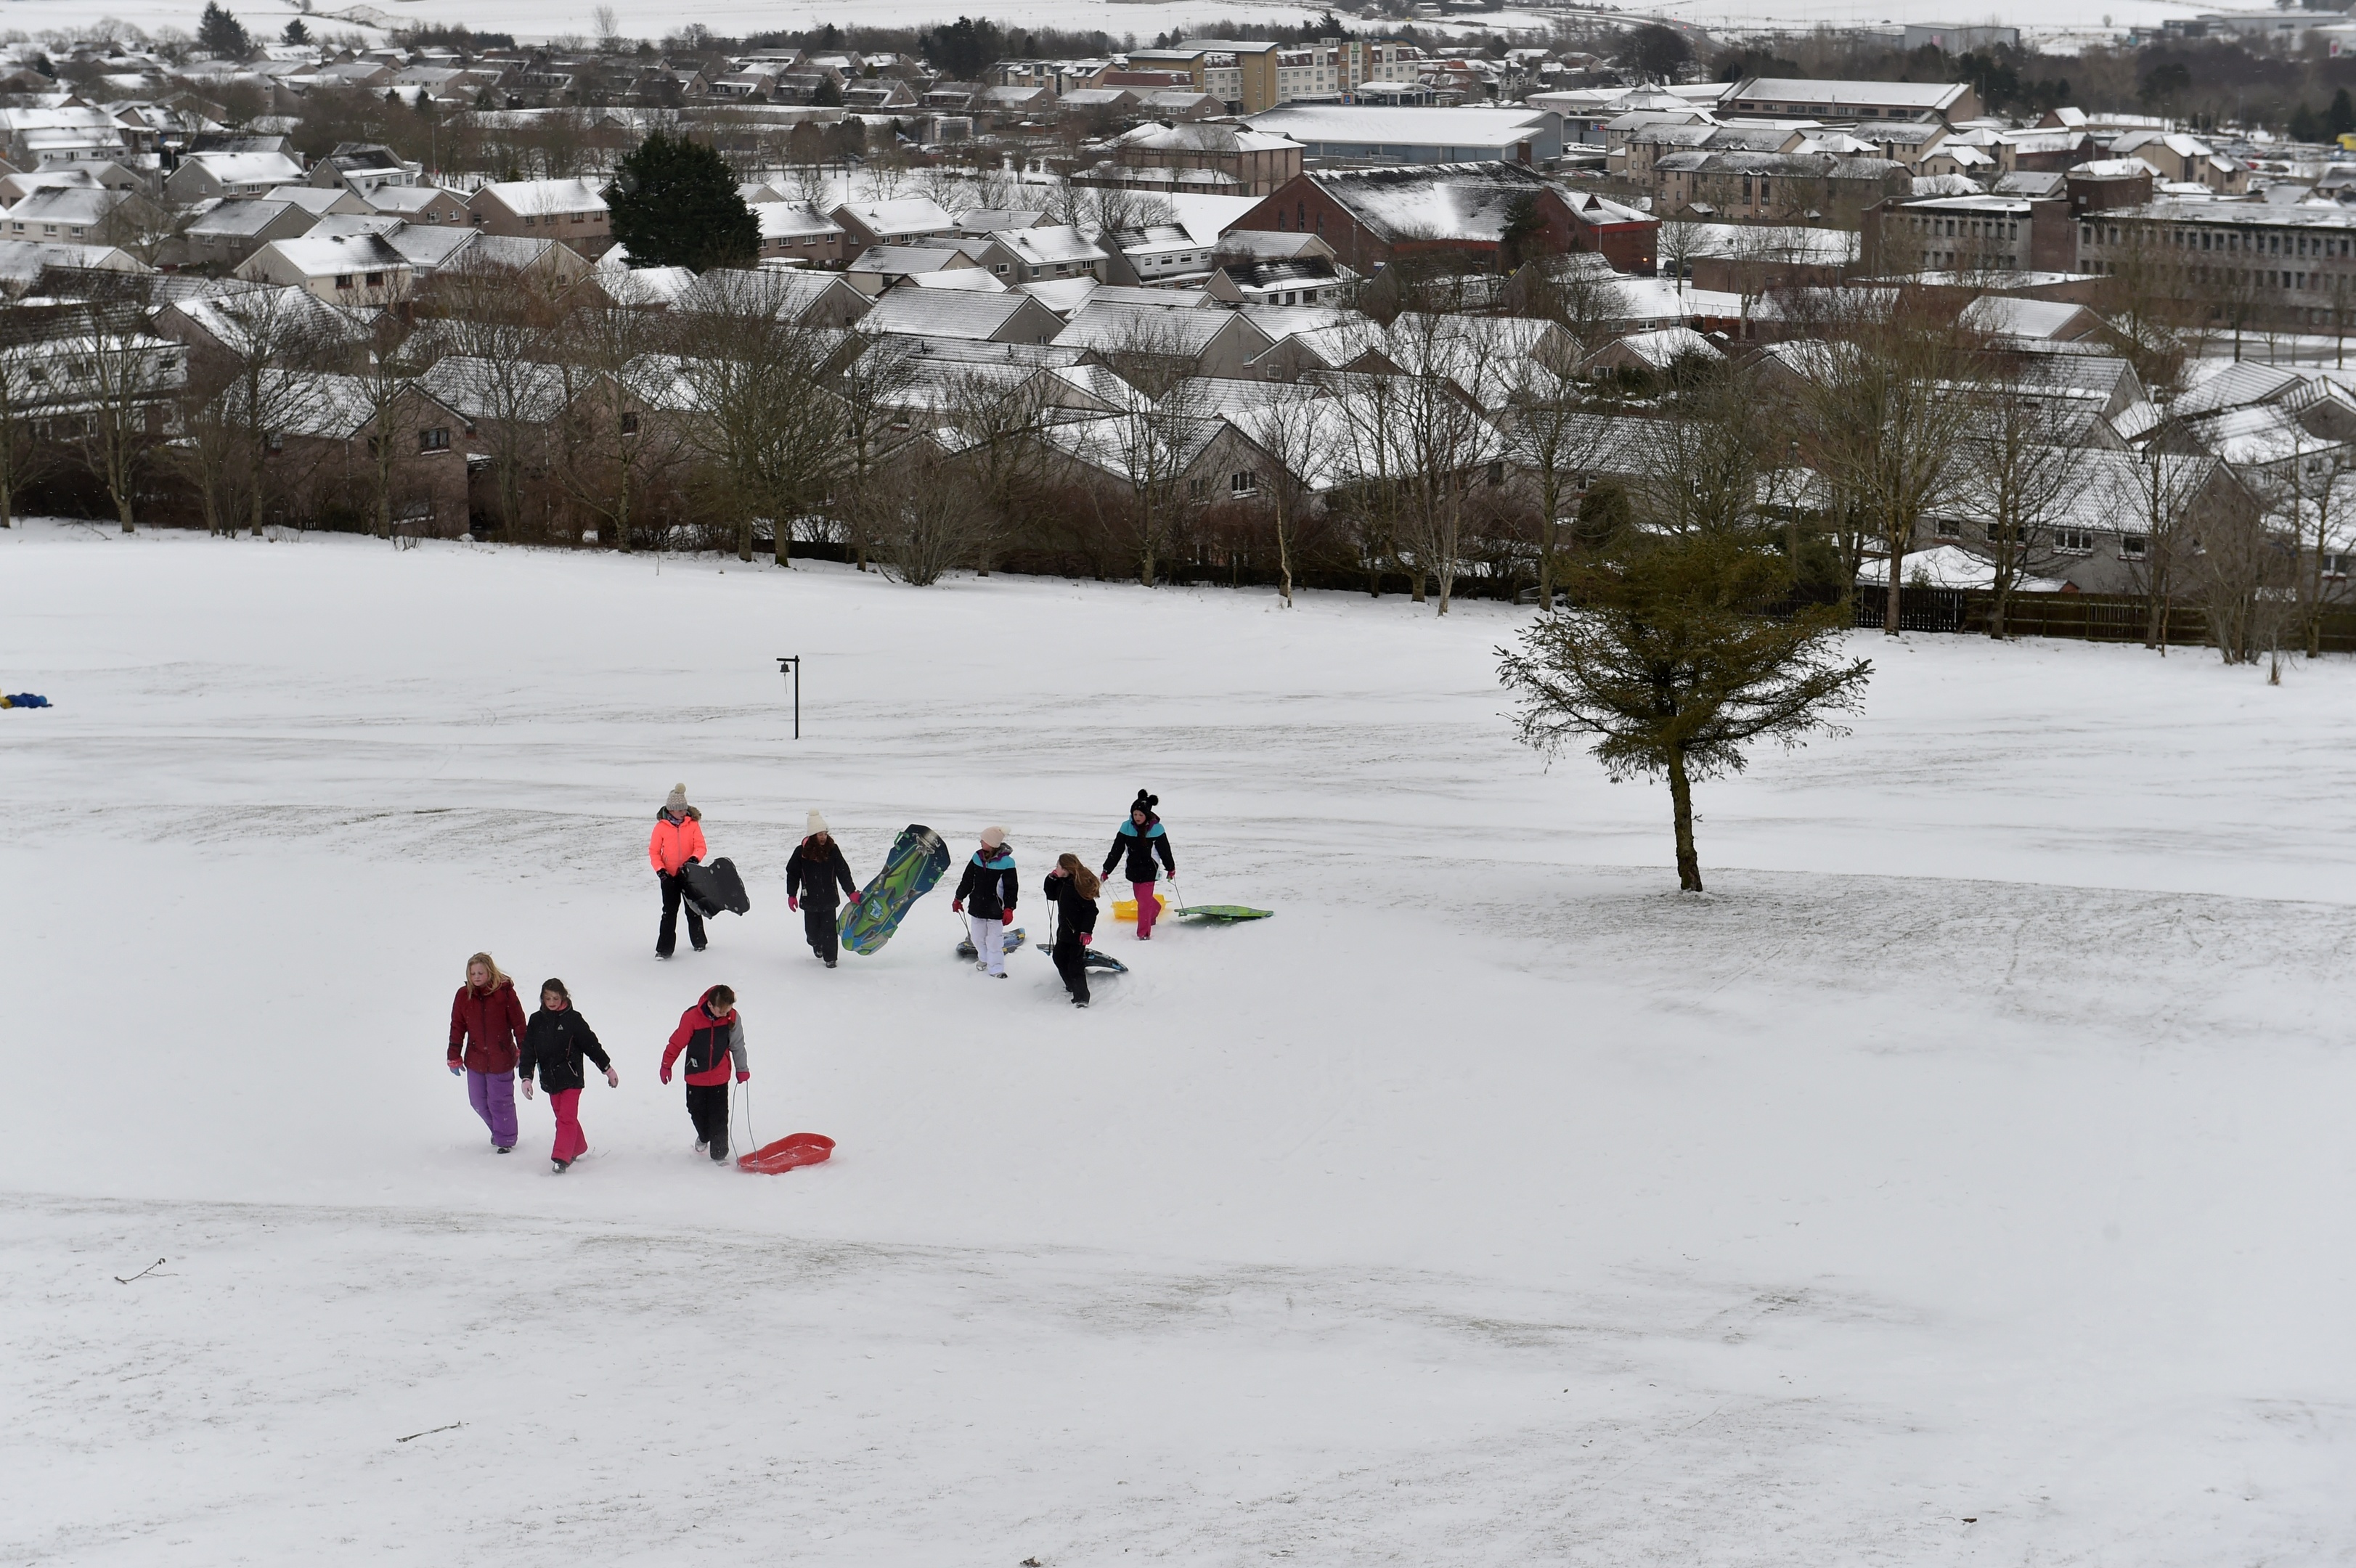 Westhill Golf Course was turned into a winter wonderland as sledges descended on the slopes.